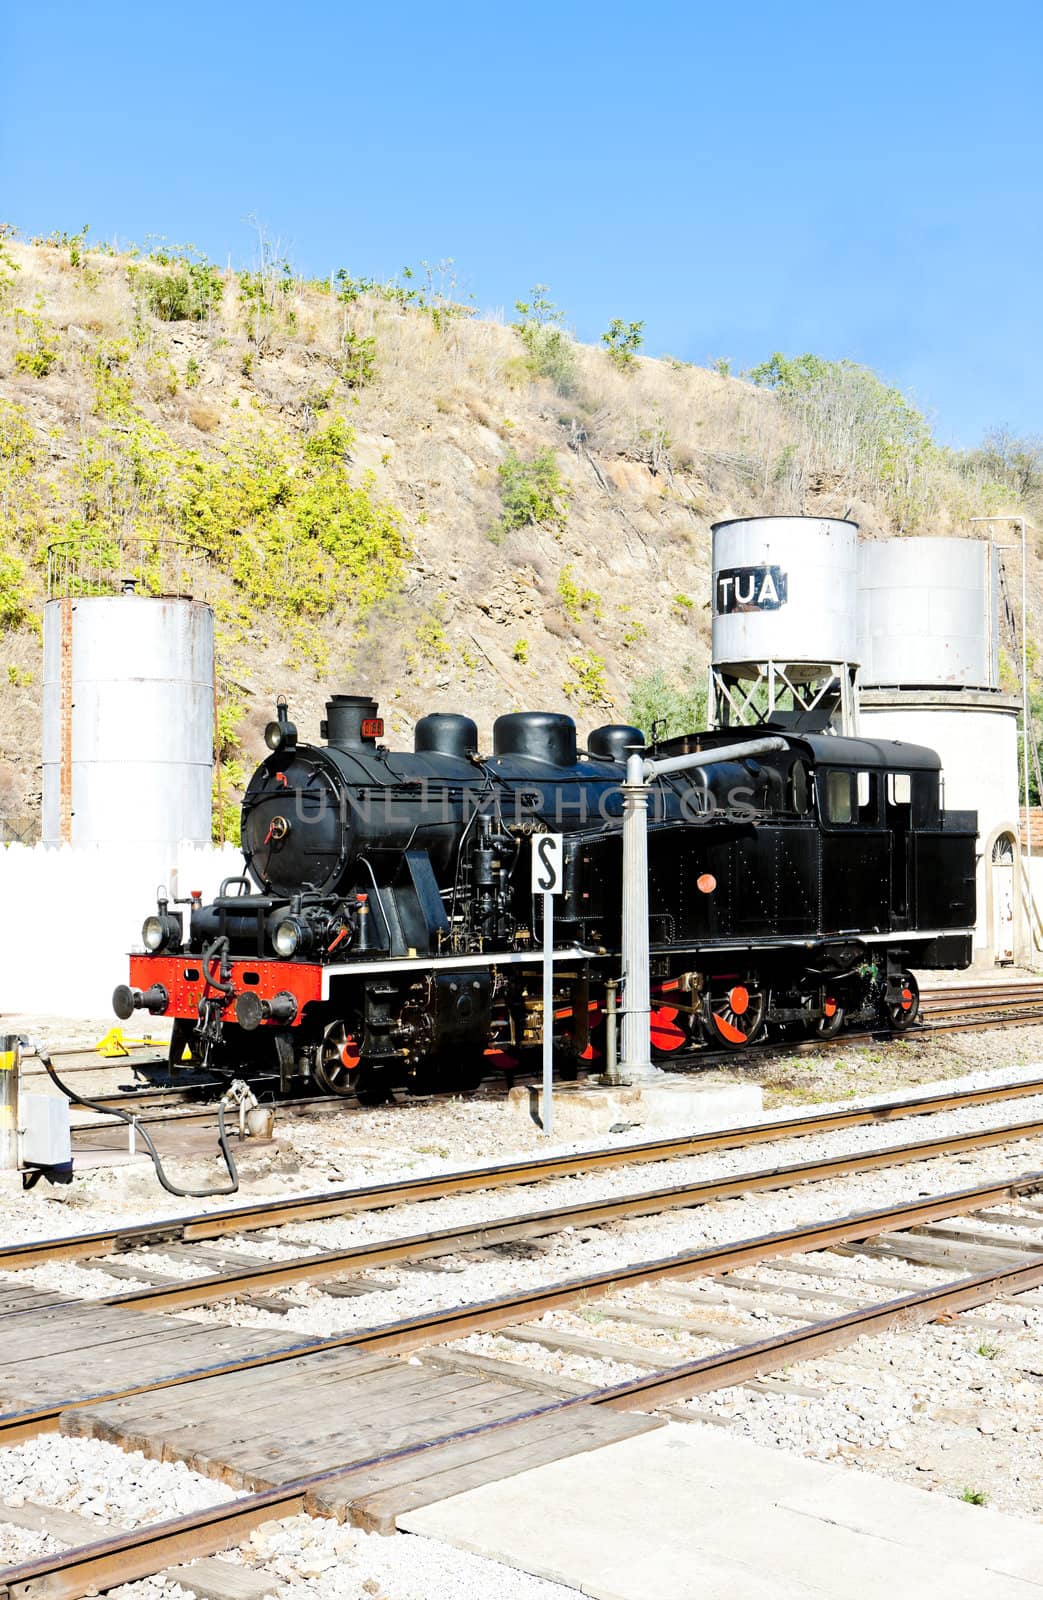 steam locomotive at railway station in Tua, Douro Valley, Portug by phbcz